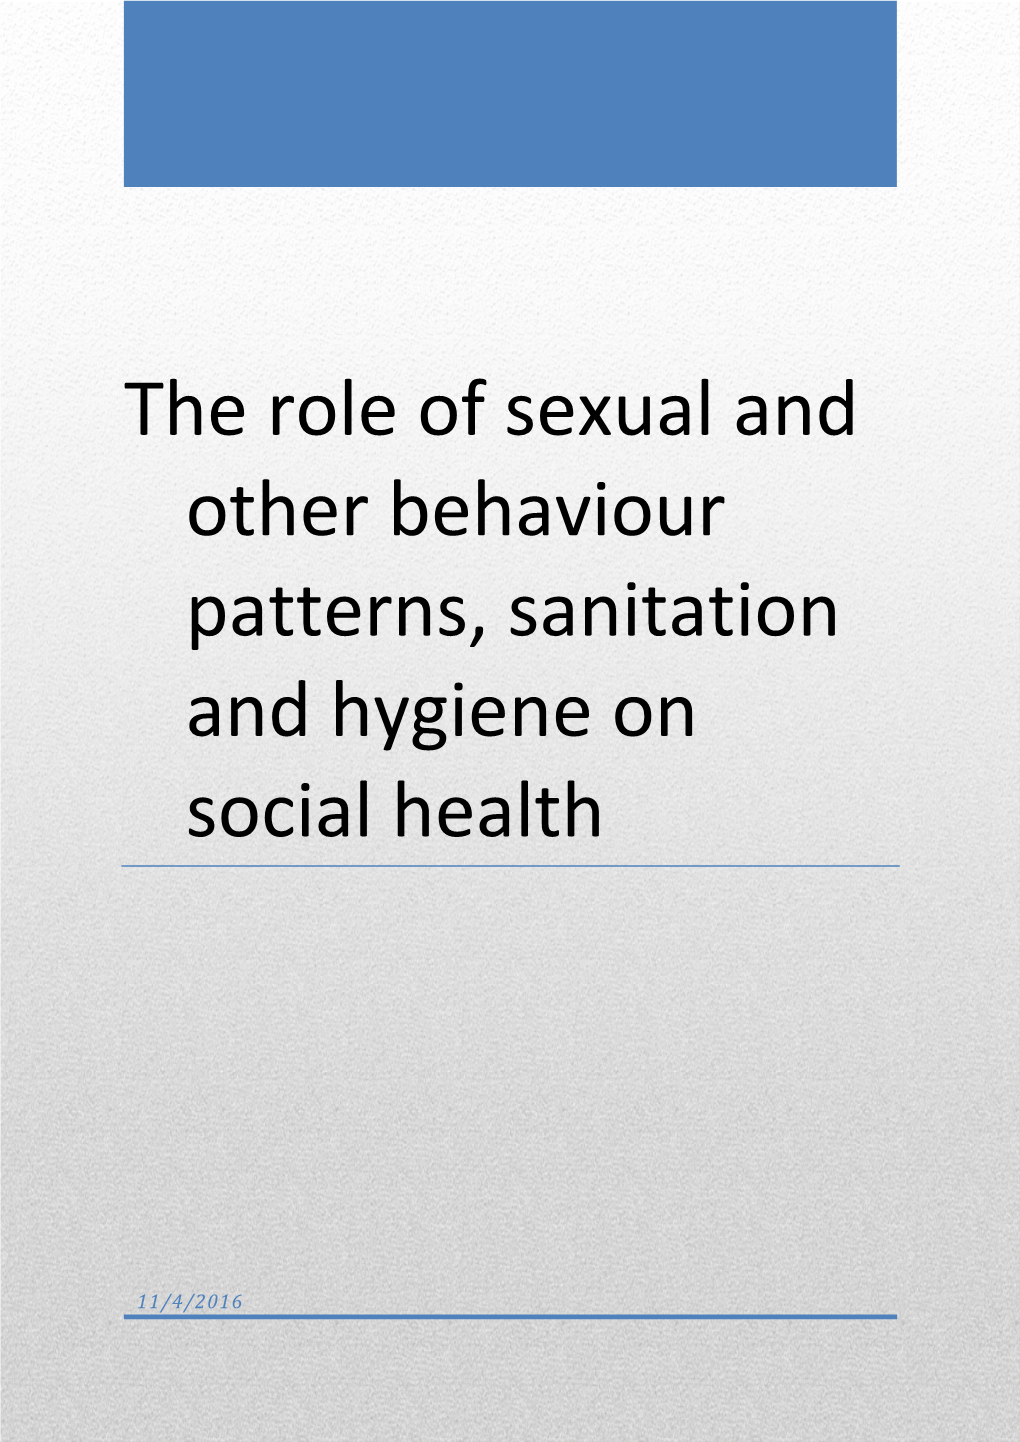 The Role of Sexual and Other Behaviour Patterns, Sanitation and Hygiene on Social Health